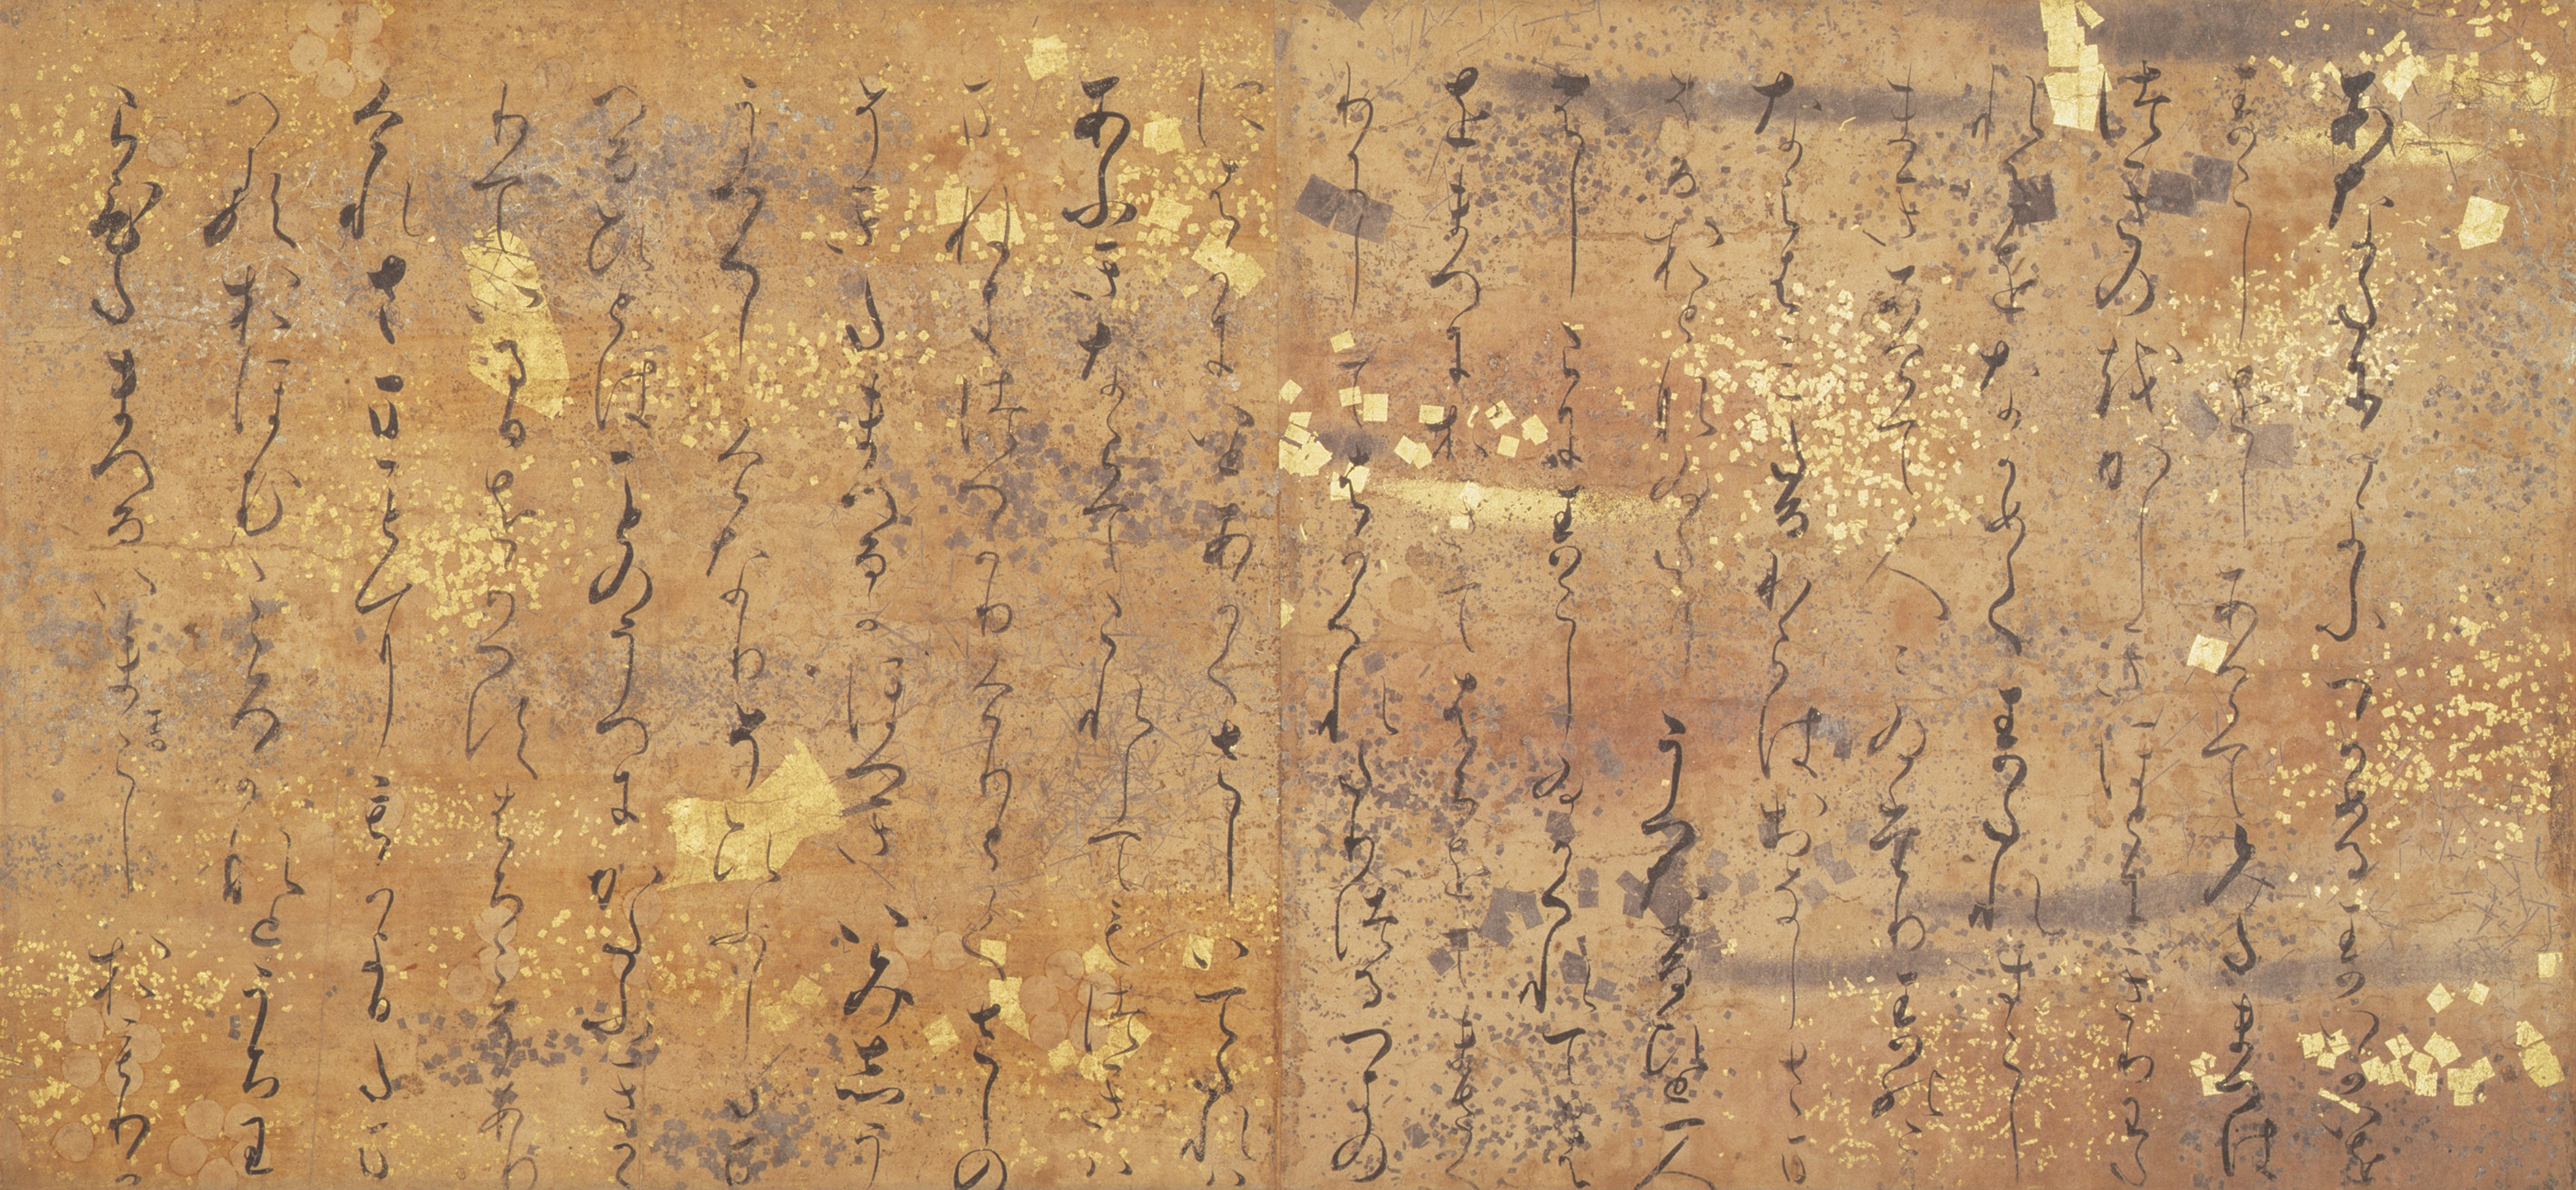 An early illustrated scroll of the Tale of Genji, depicting several women in Heian-style robes inside a palace. One is reading a book, one is combing another's hair, and some are sitting behind a curtain.